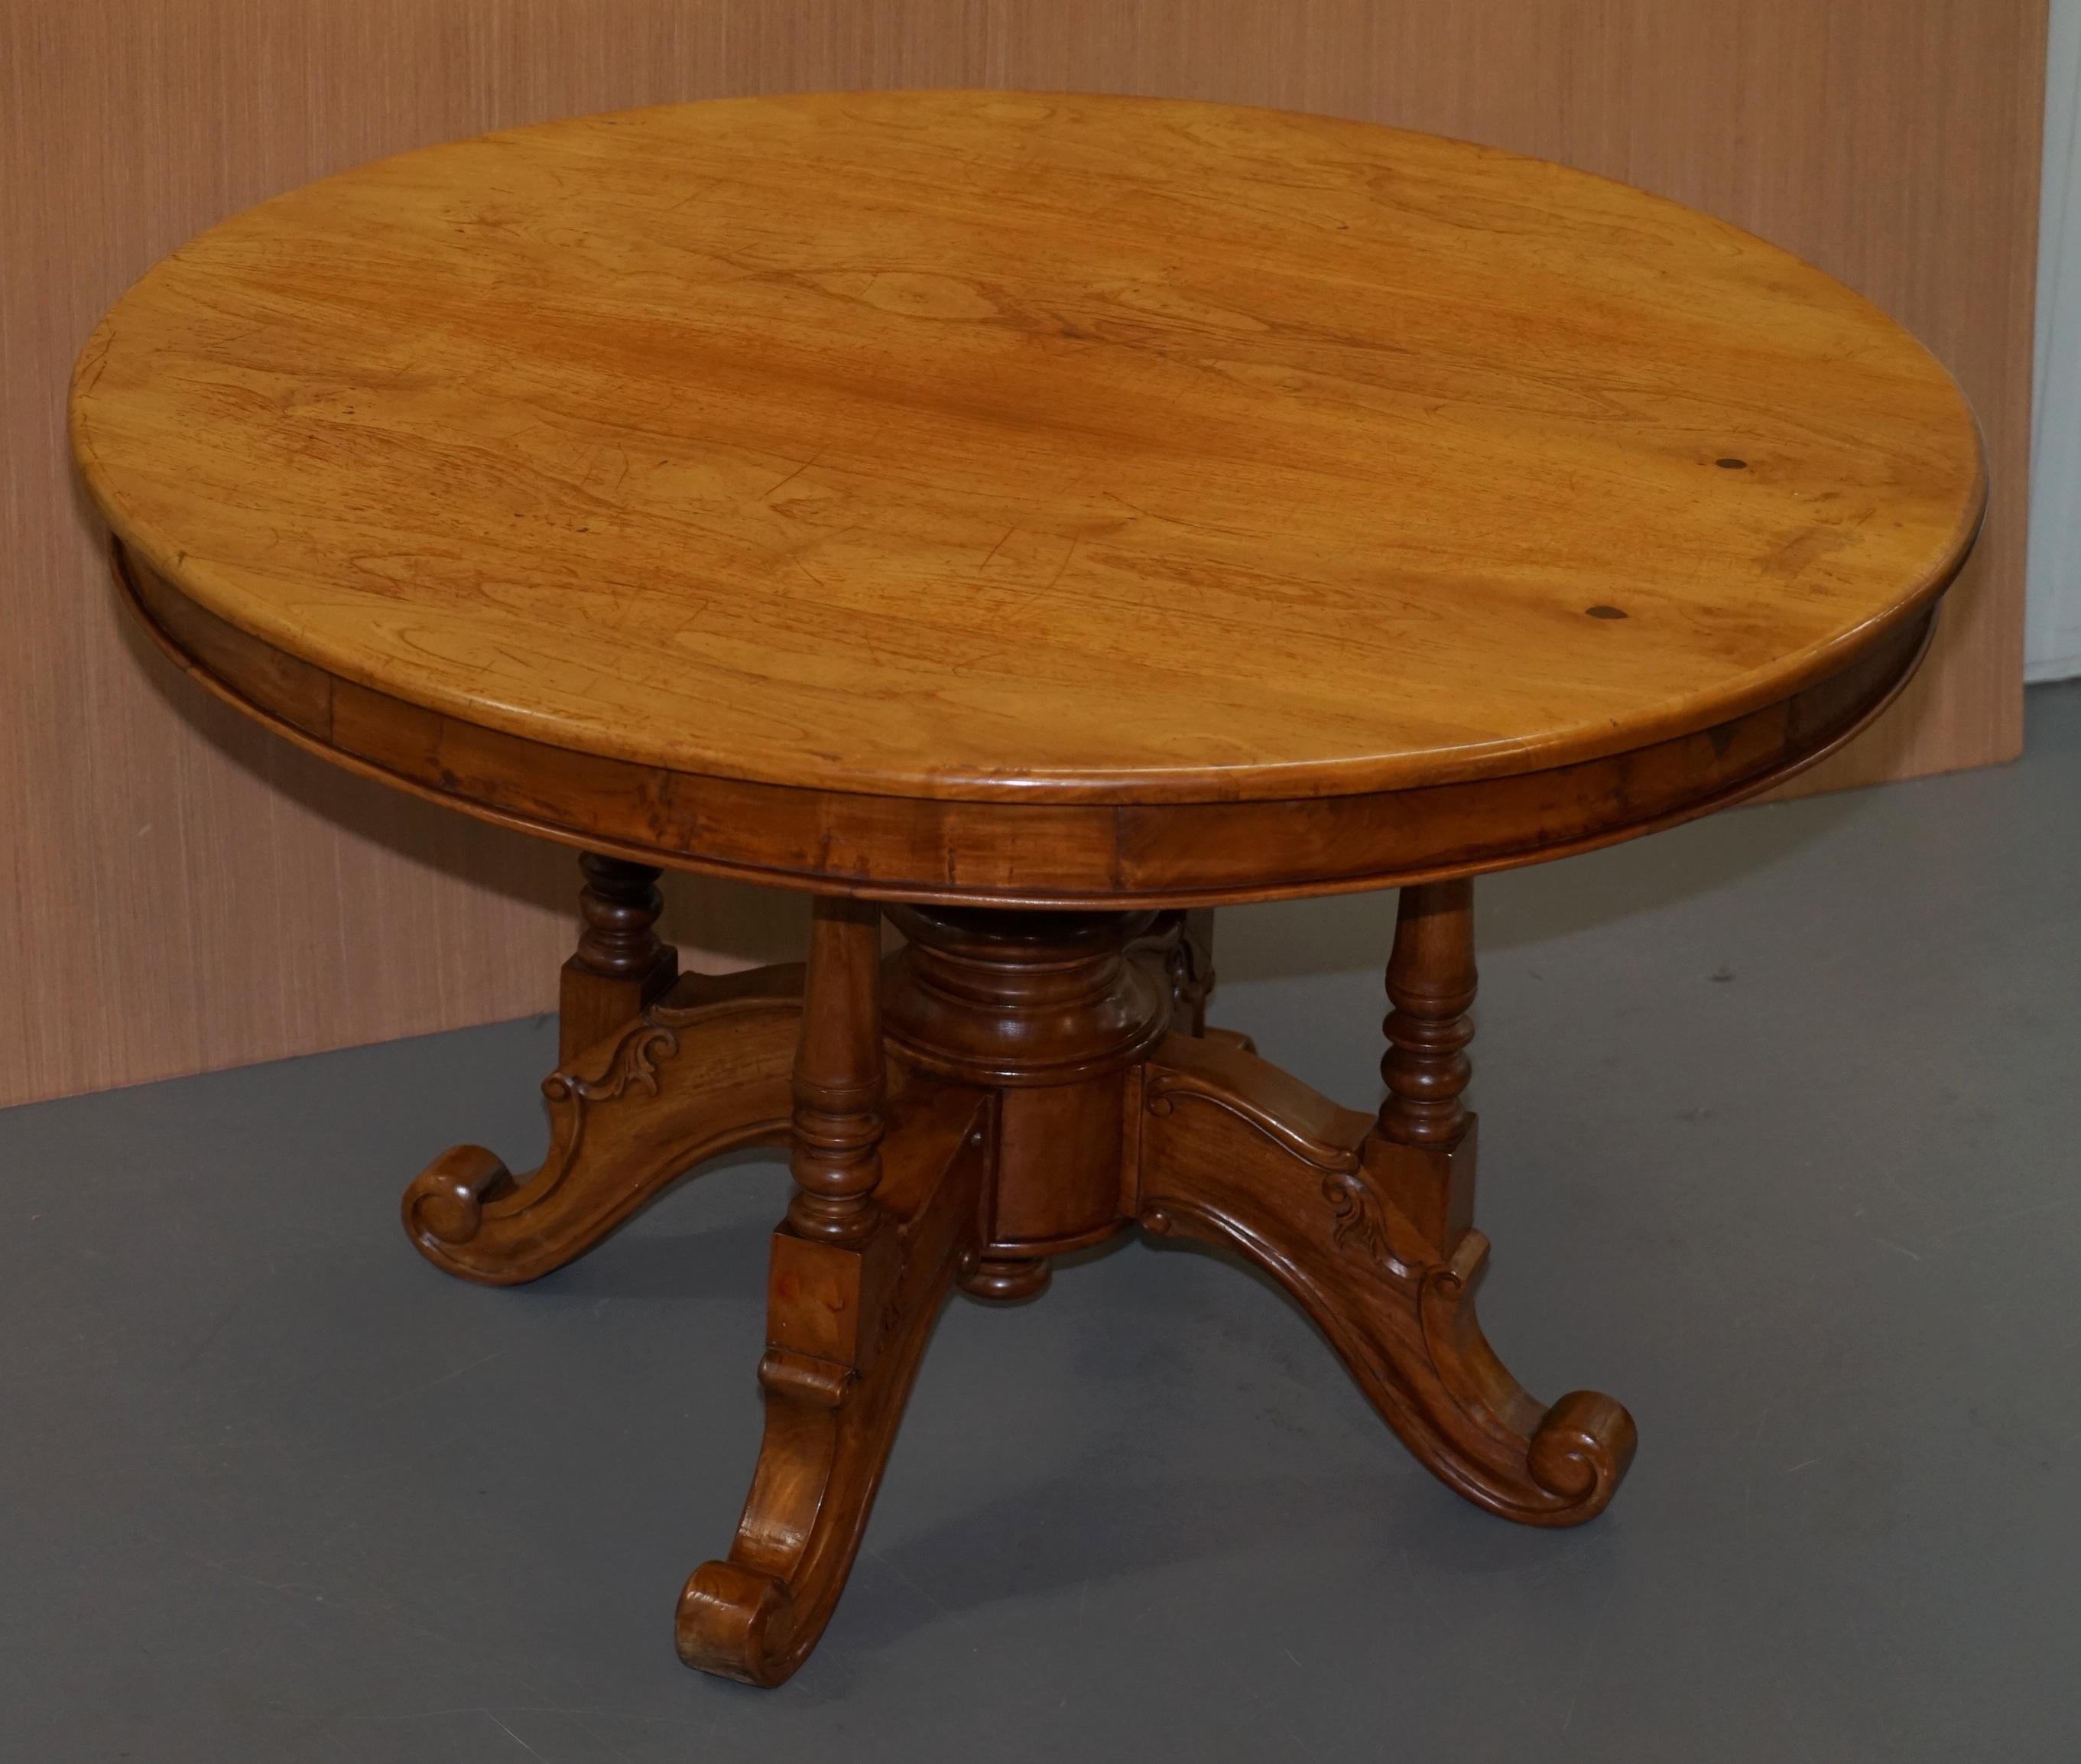 We are delighted to offer for sale this lovely vintage Golden Mahogany round dining table with ornately carved base

A very good looking well made and decorative piece, the base is four nicely turned pillared legs and a very large solid turned